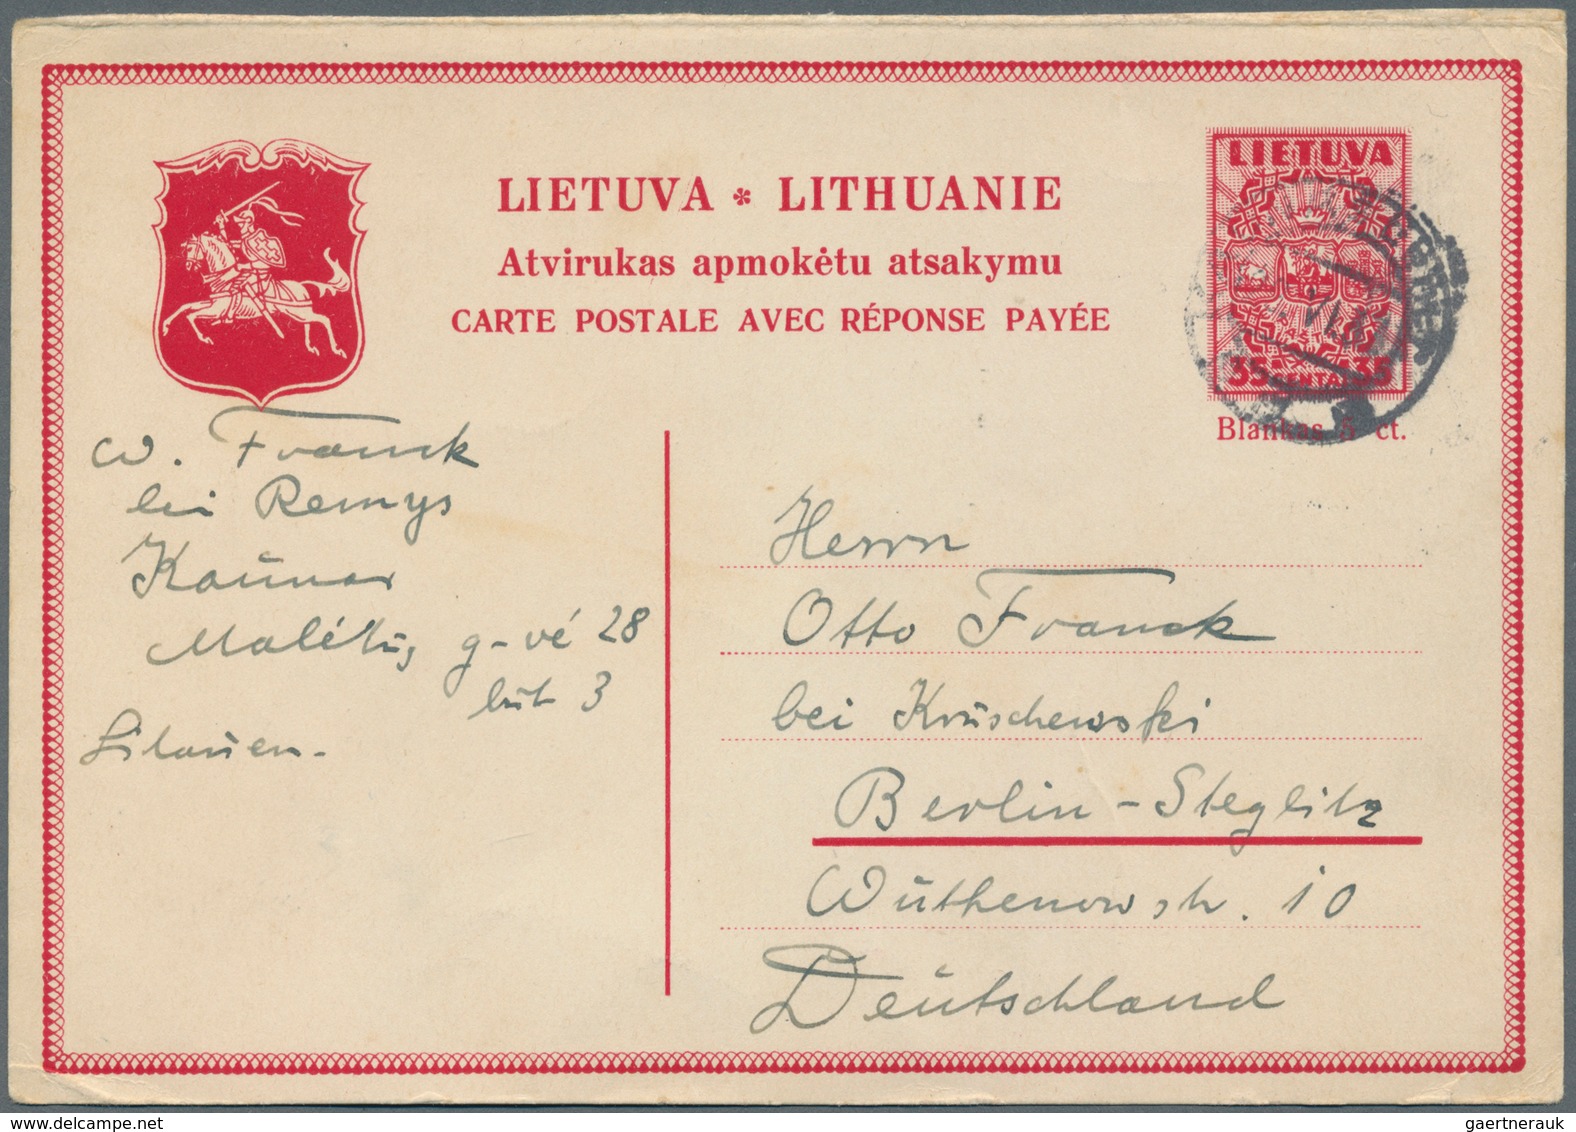 Litauen - Ganzsachen: 1937 Postal Stationery Card 35 Centai Red Commercially Used From Kaunas To Ber - Lithuania